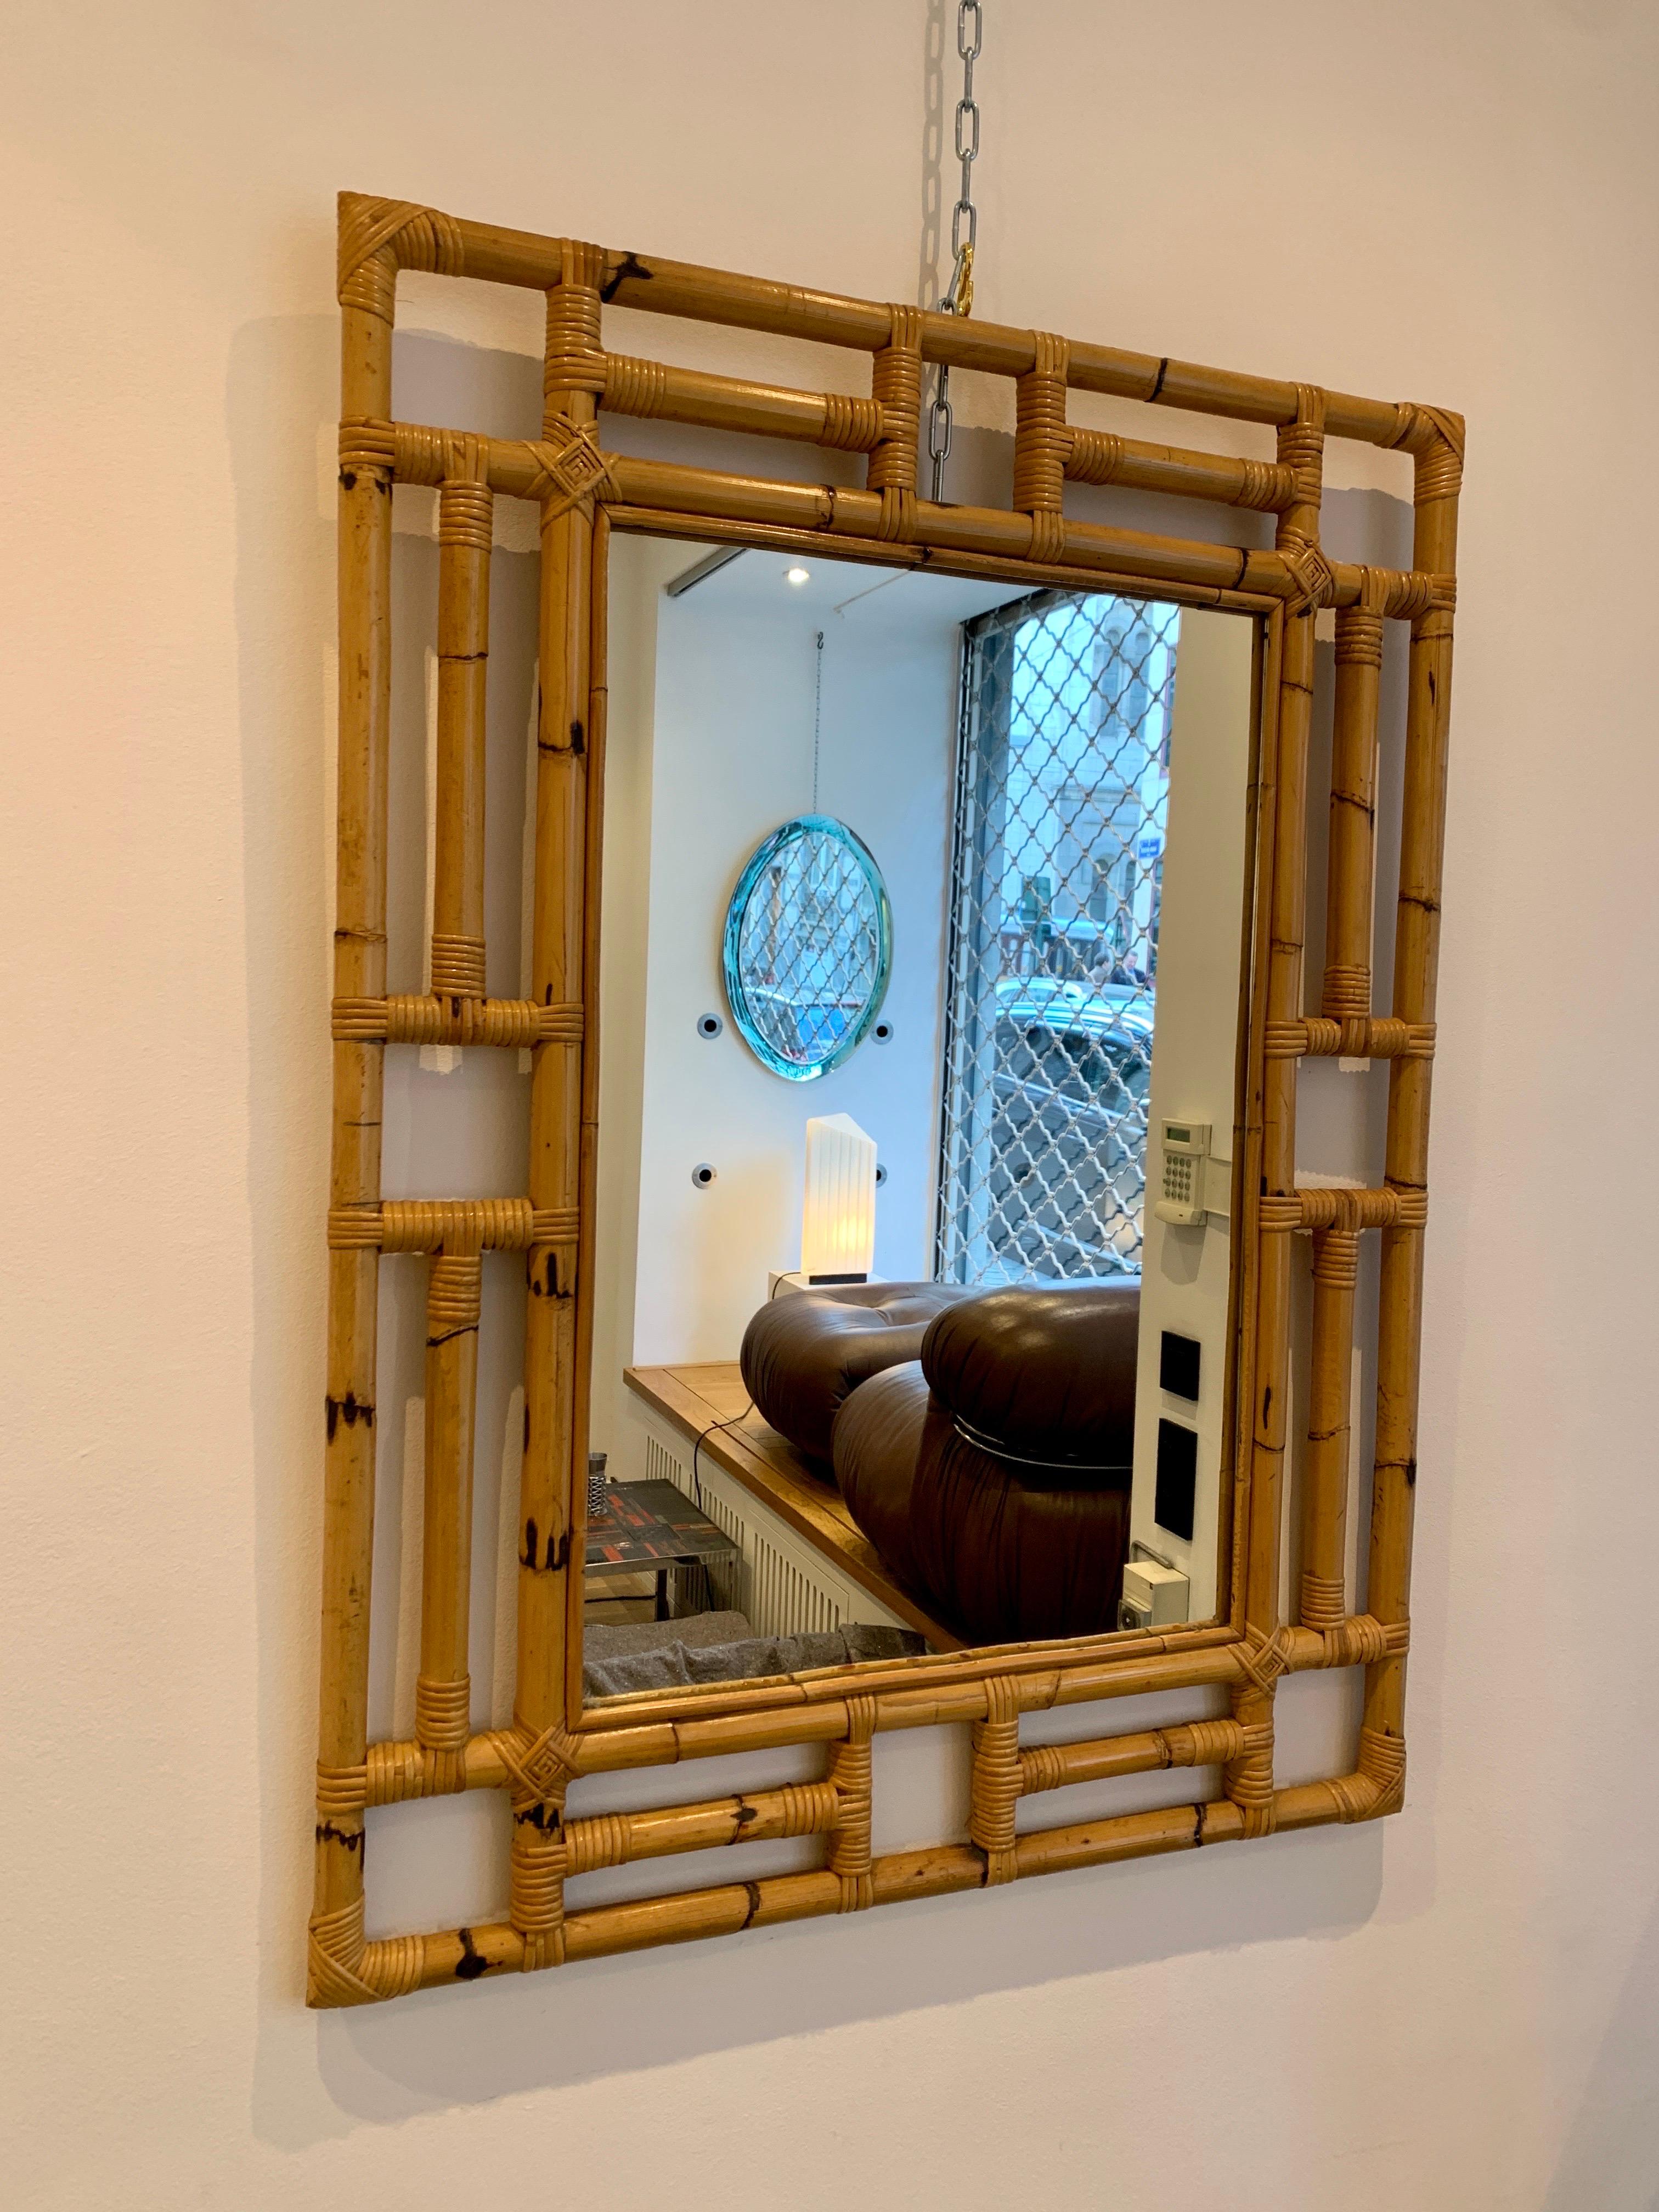 Elegant rattan mirror attributed to Vivai del Sud. Dating from 1970s, in the Bohemian chic style.